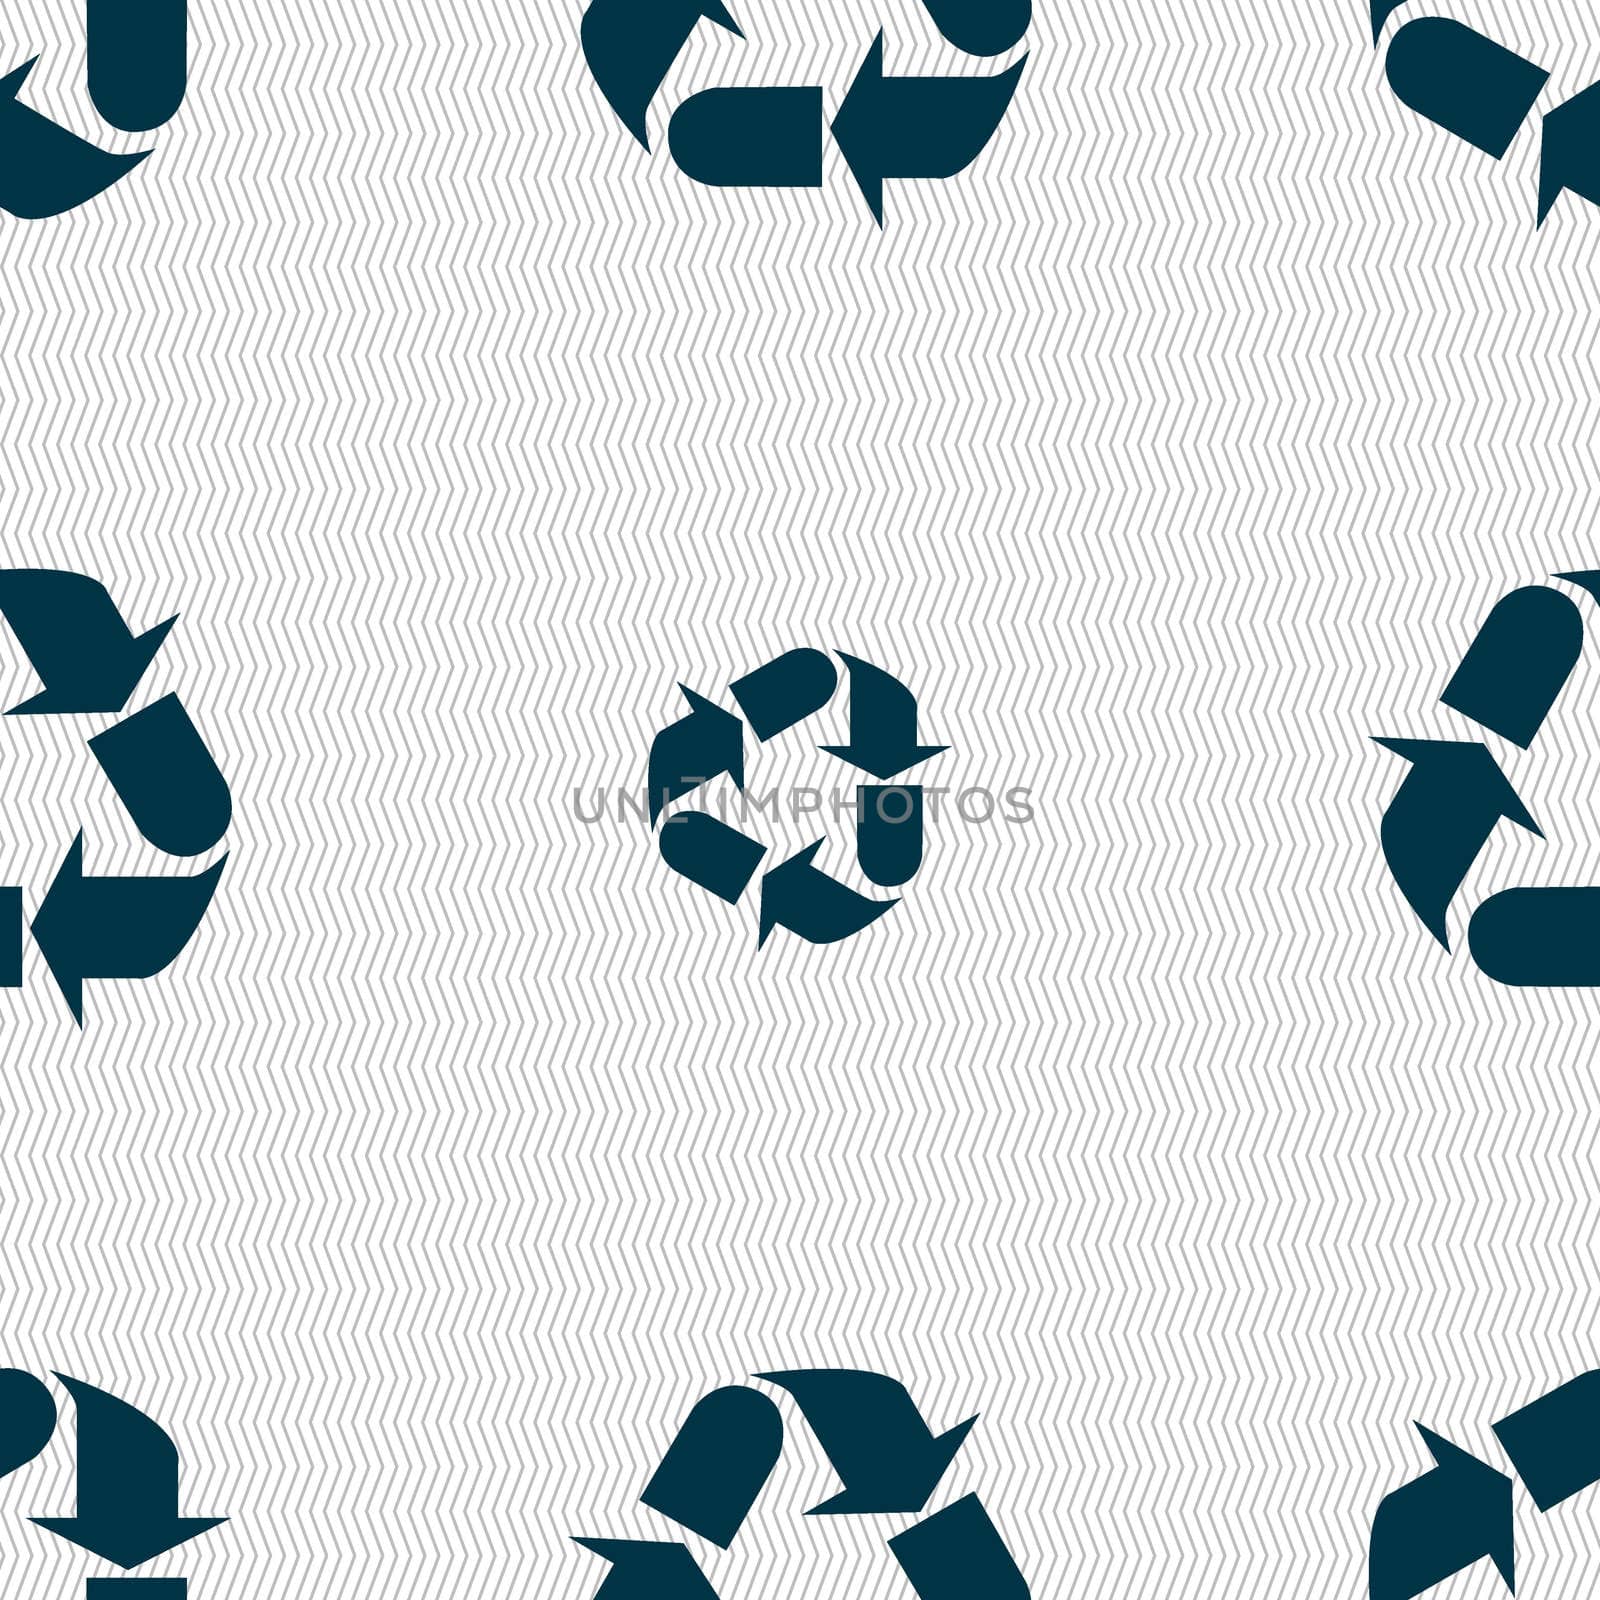 processing icon sign. Seamless abstract background with geometric shapes. illustration